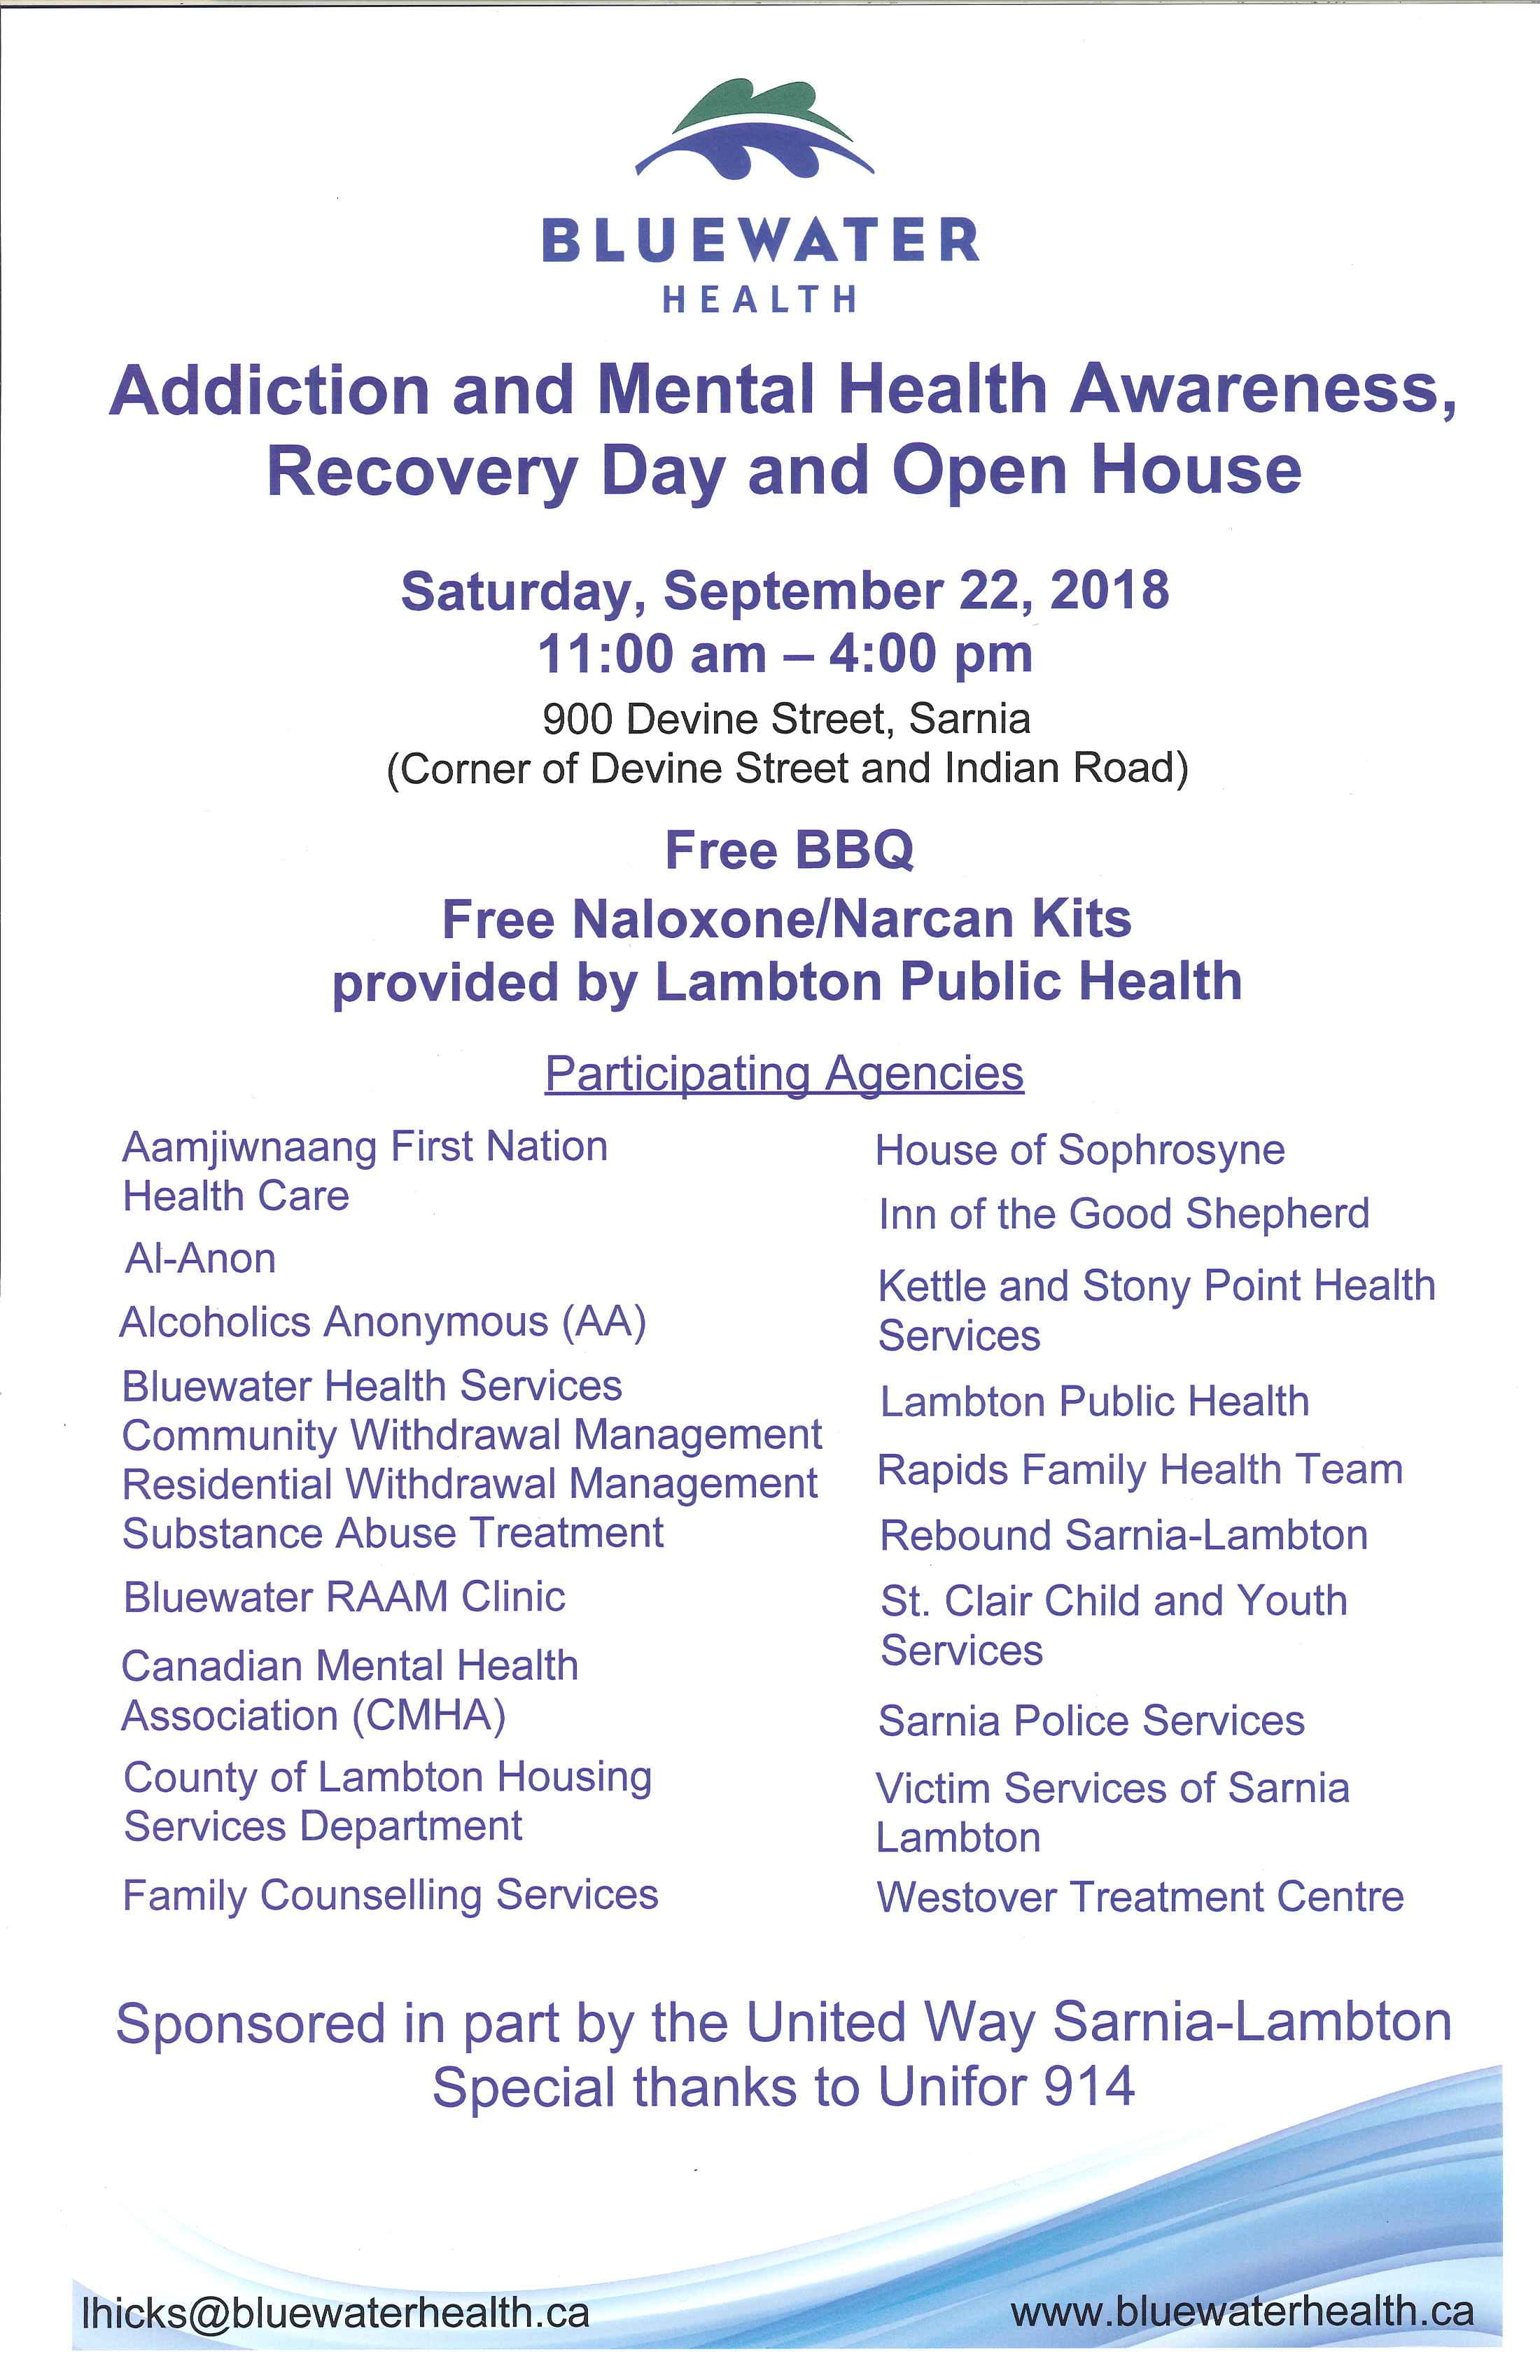 Bluewater Health Addiction & Mental Health Awareness, Recovery Day and Open House